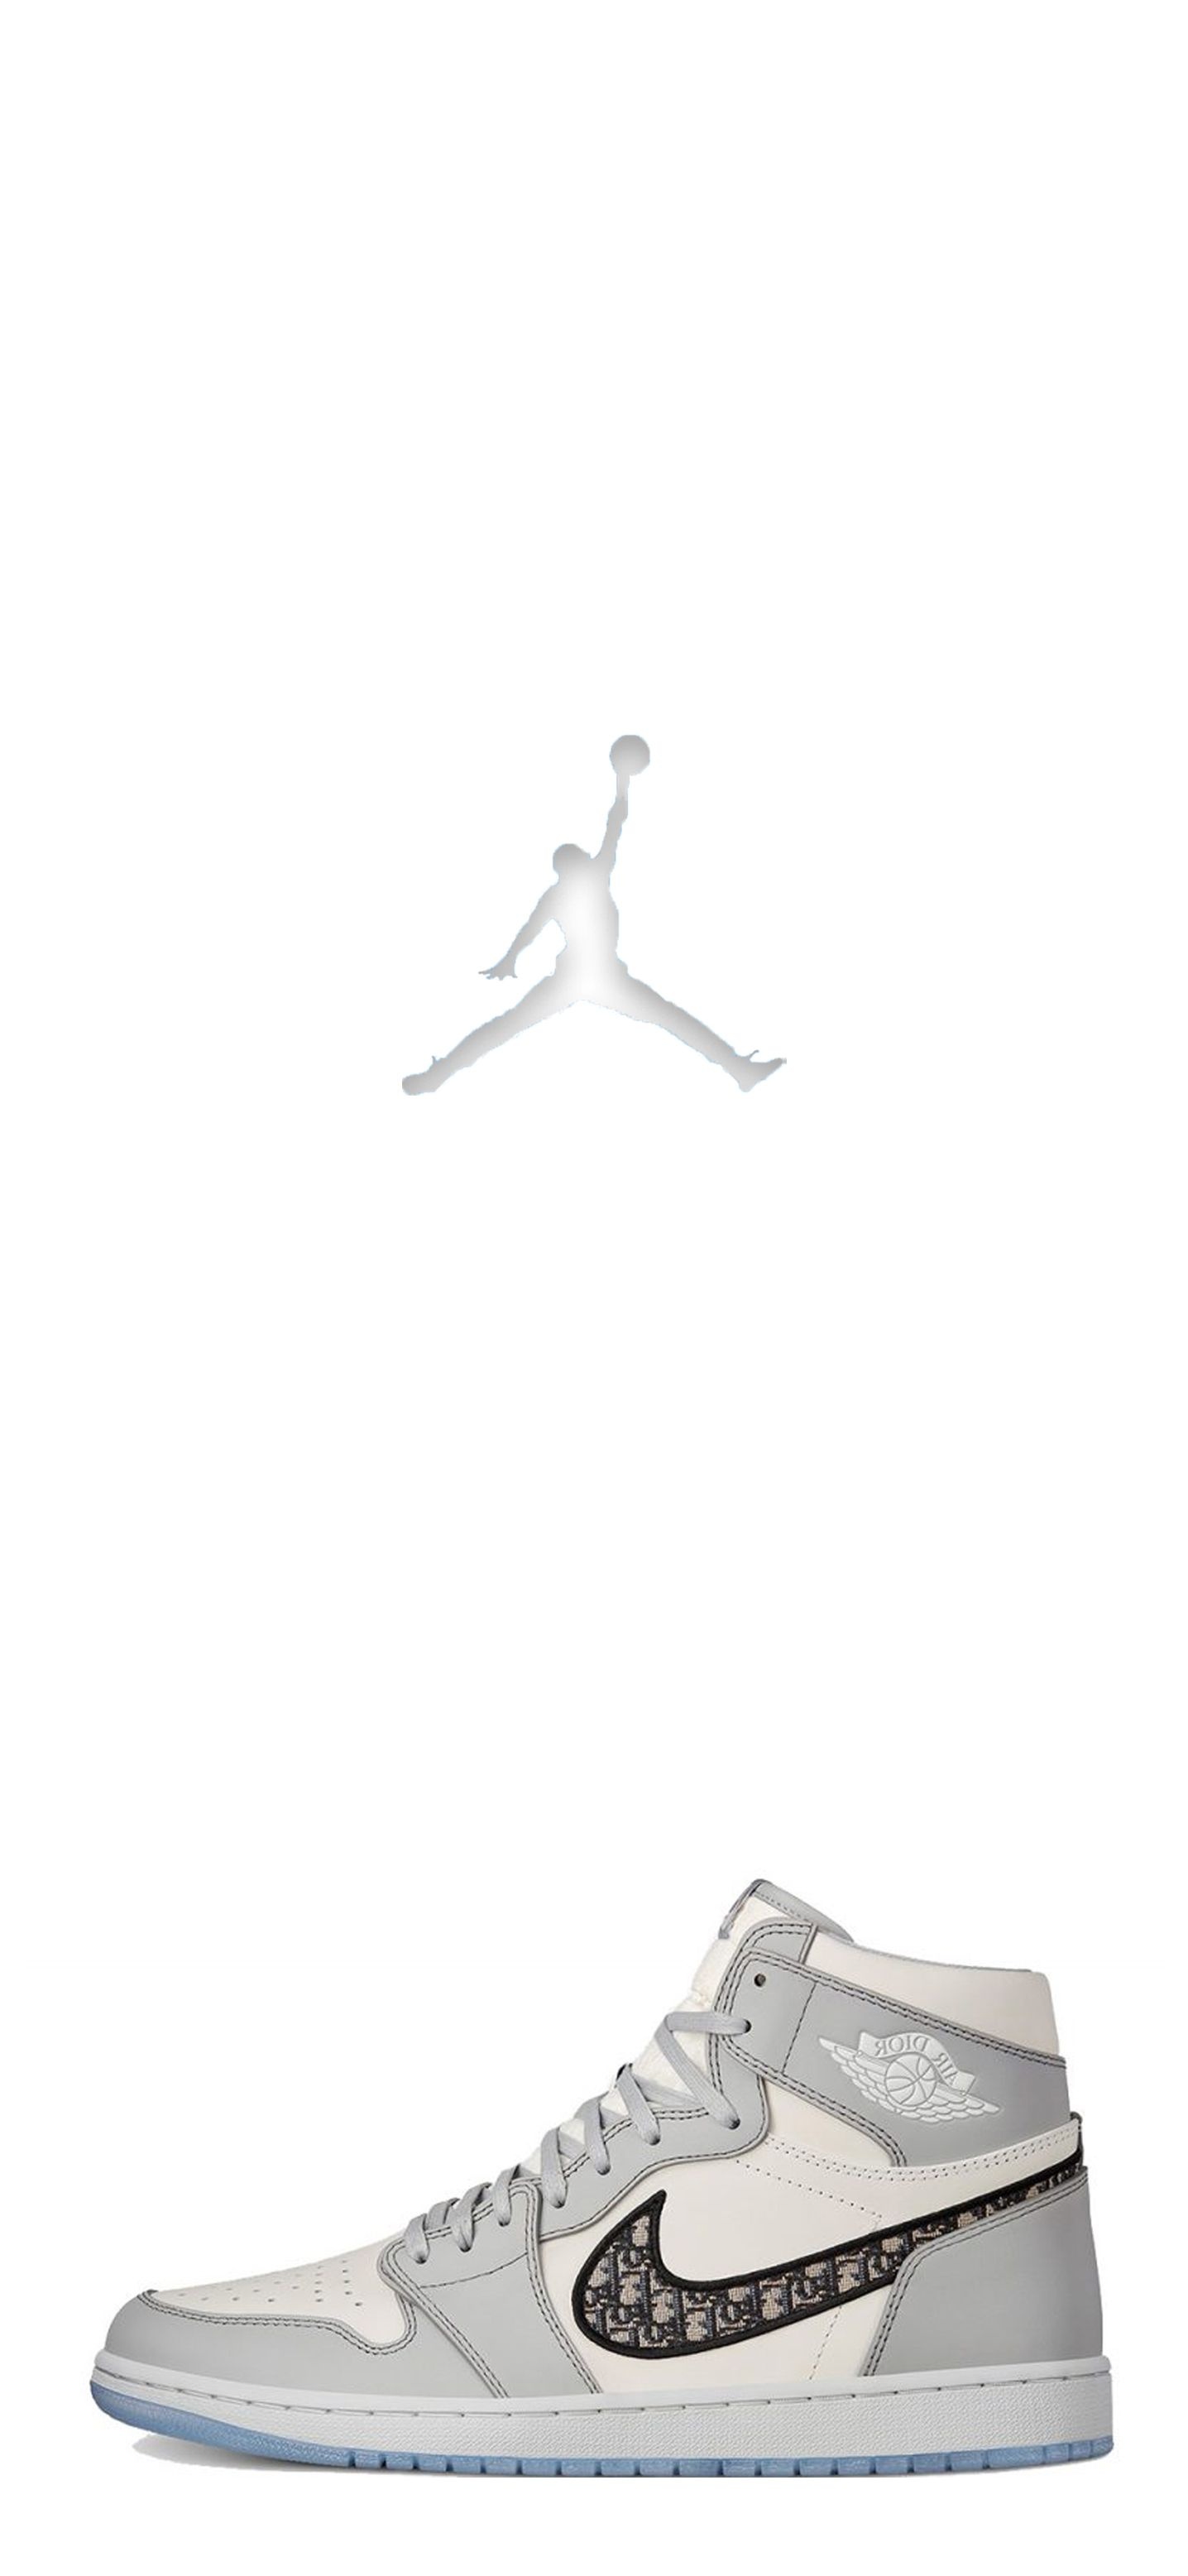 Dior: Collaboration with French fashion house, Jordan 1 Retro High. 1440x3120 HD Background.